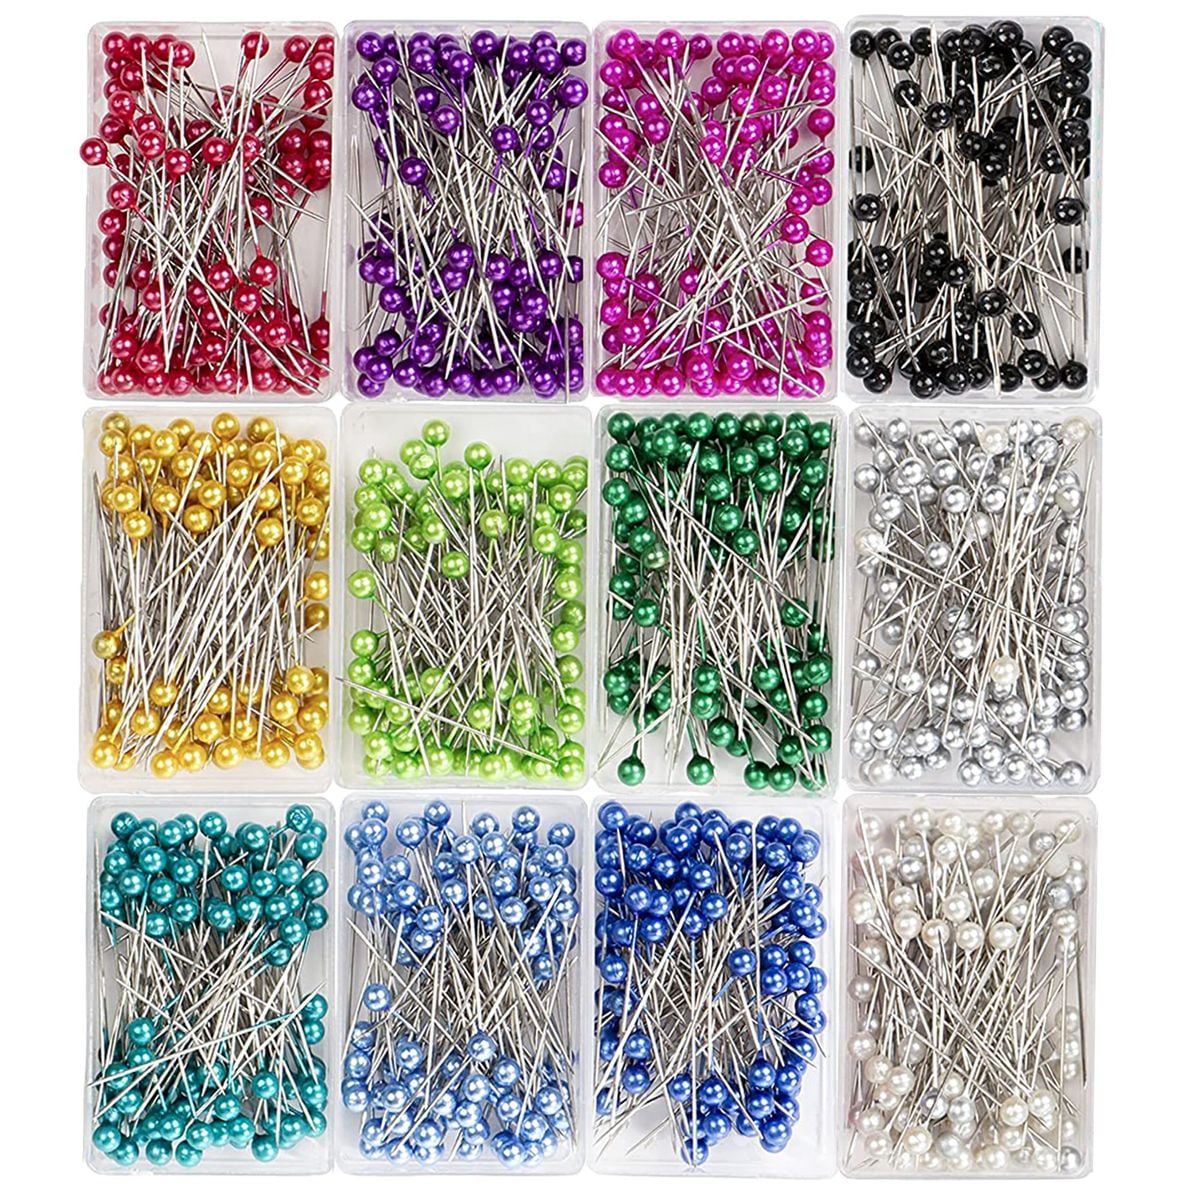 Straight Pins with Colored Ball Glass Heads Long 500PCS Sewing Pins for Fabric 